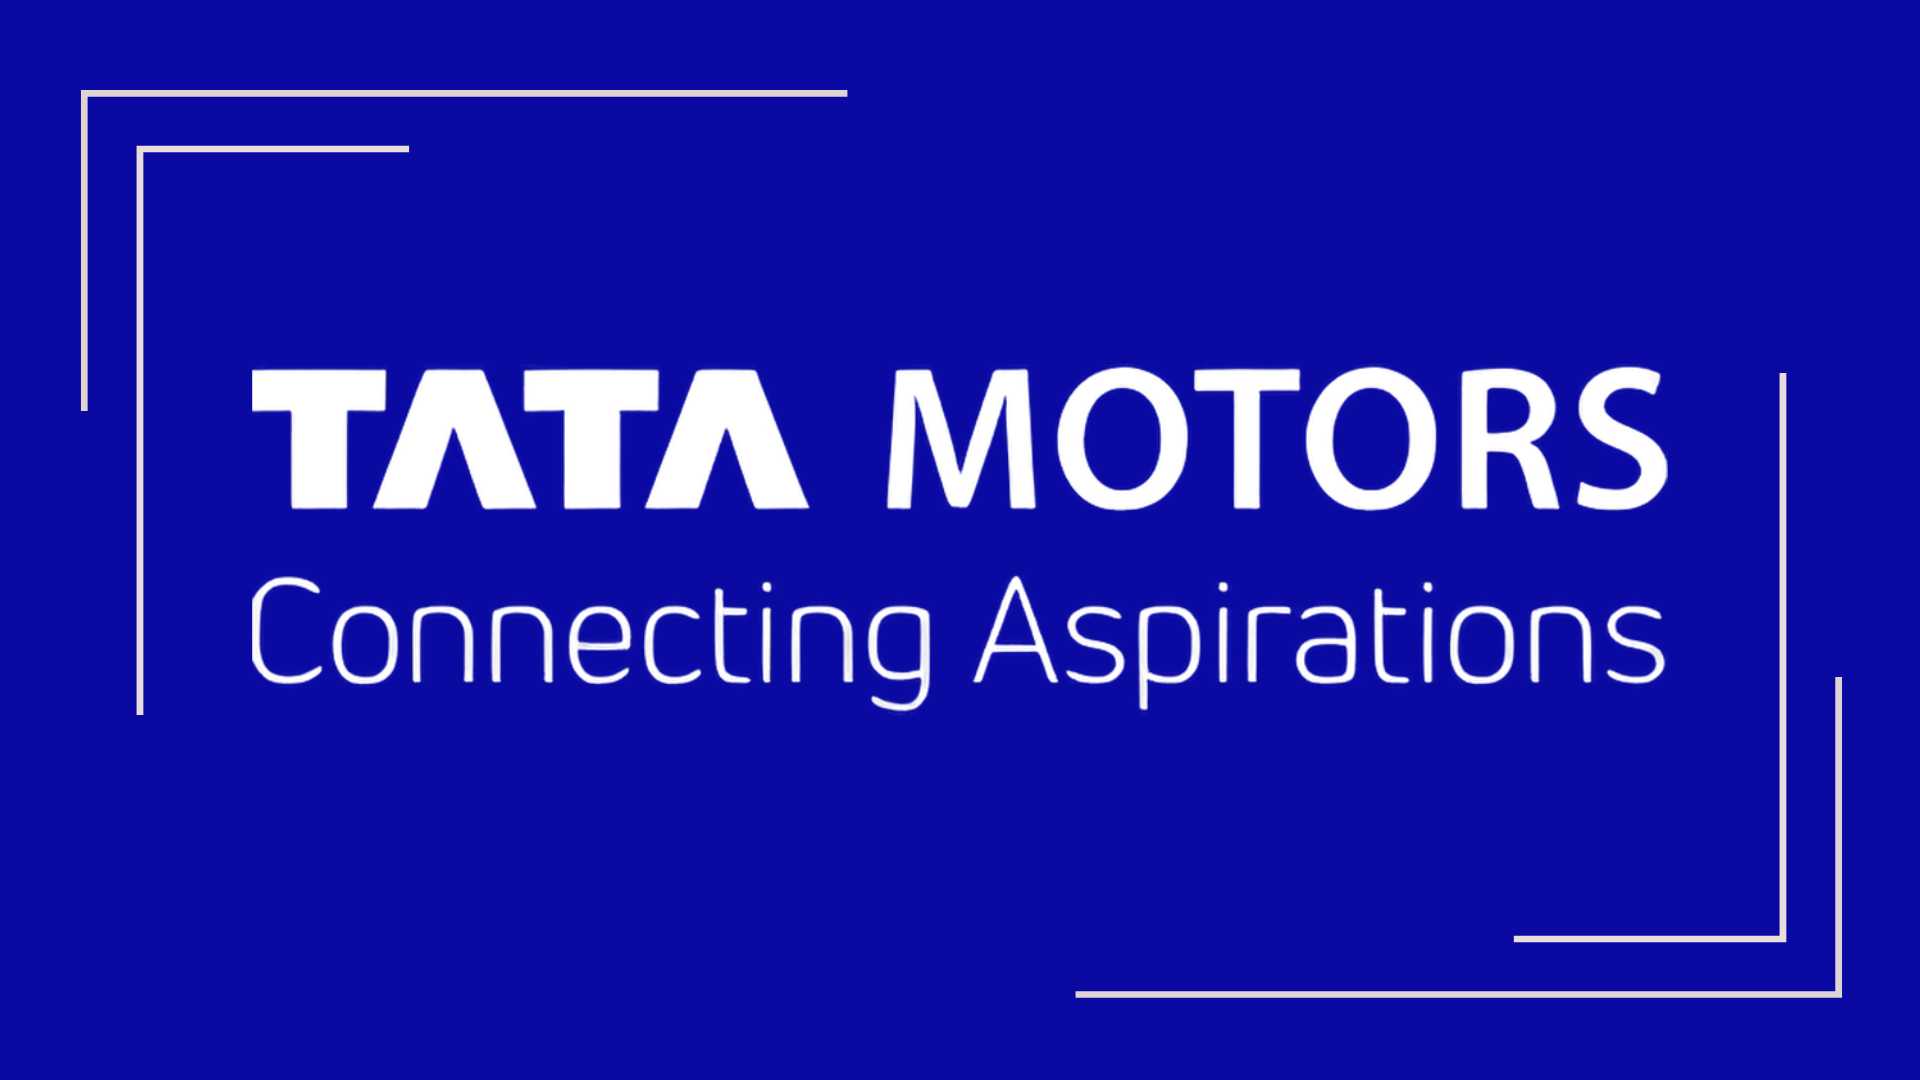 Tata Motors -List Of Companies Owned by Tata Group